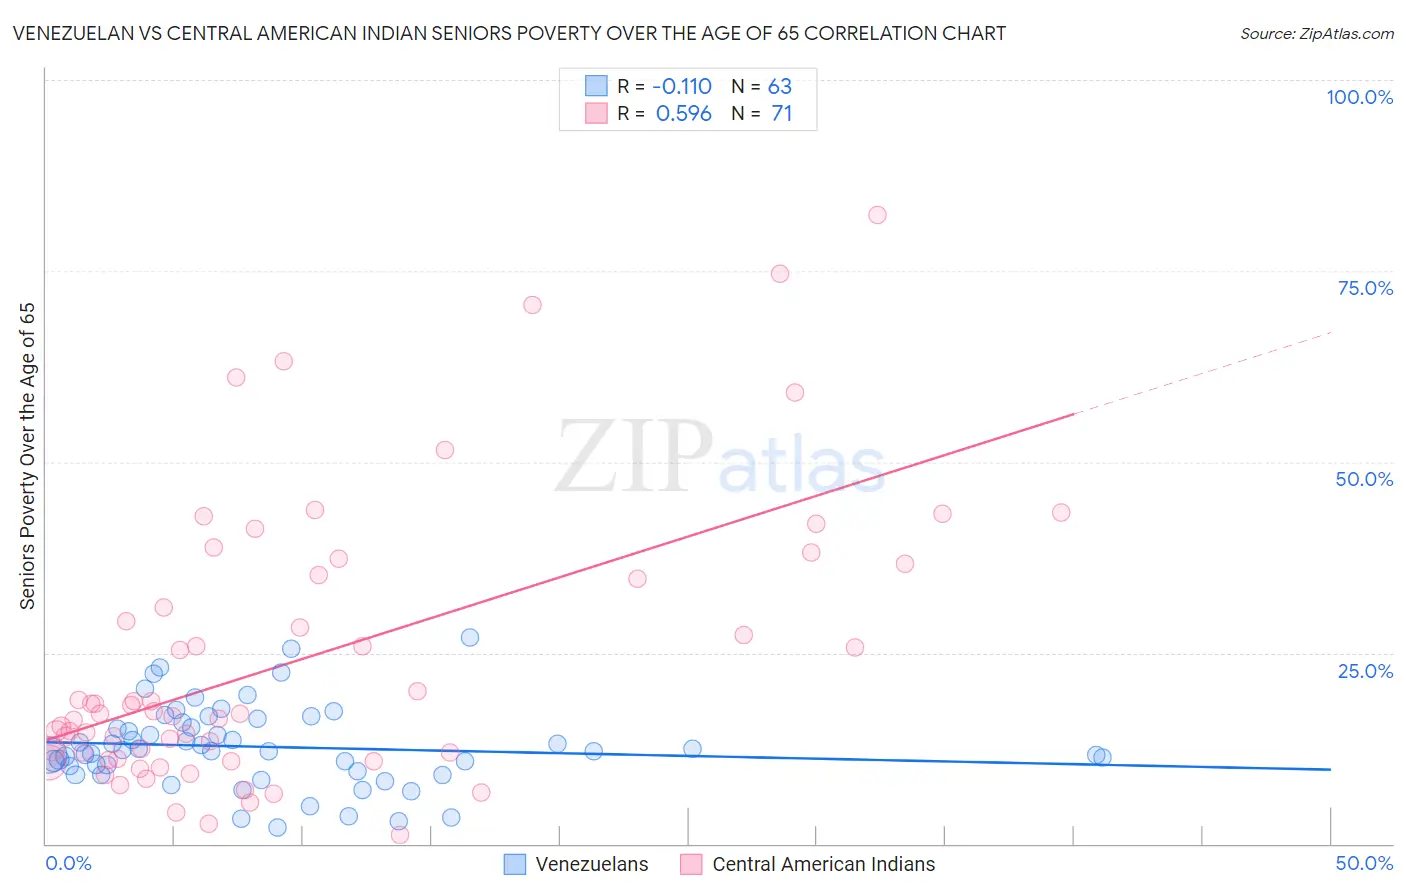 Venezuelan vs Central American Indian Seniors Poverty Over the Age of 65